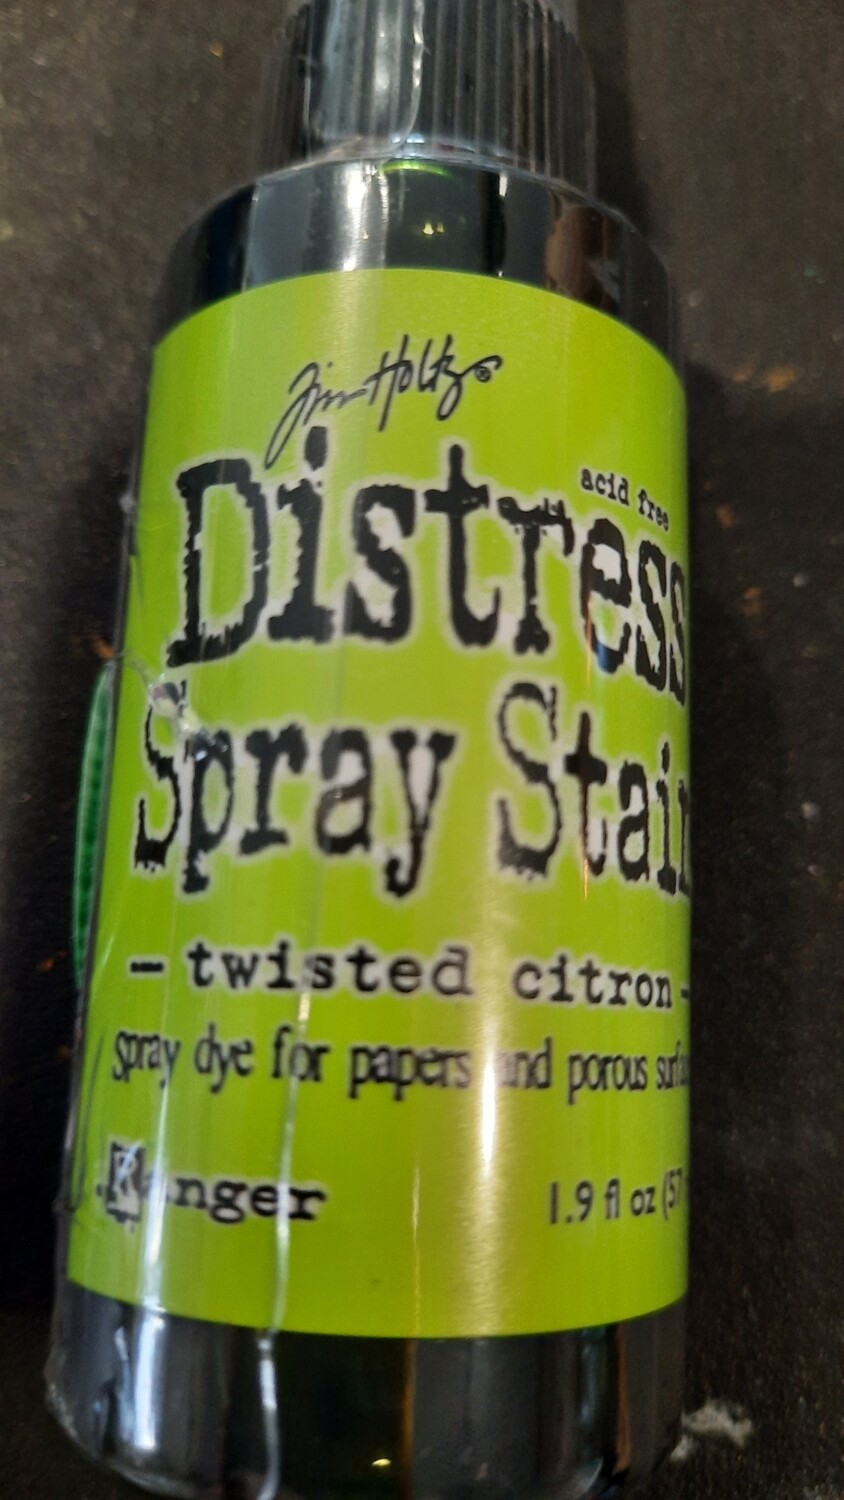 Twisted Citron Distress Spray Stain